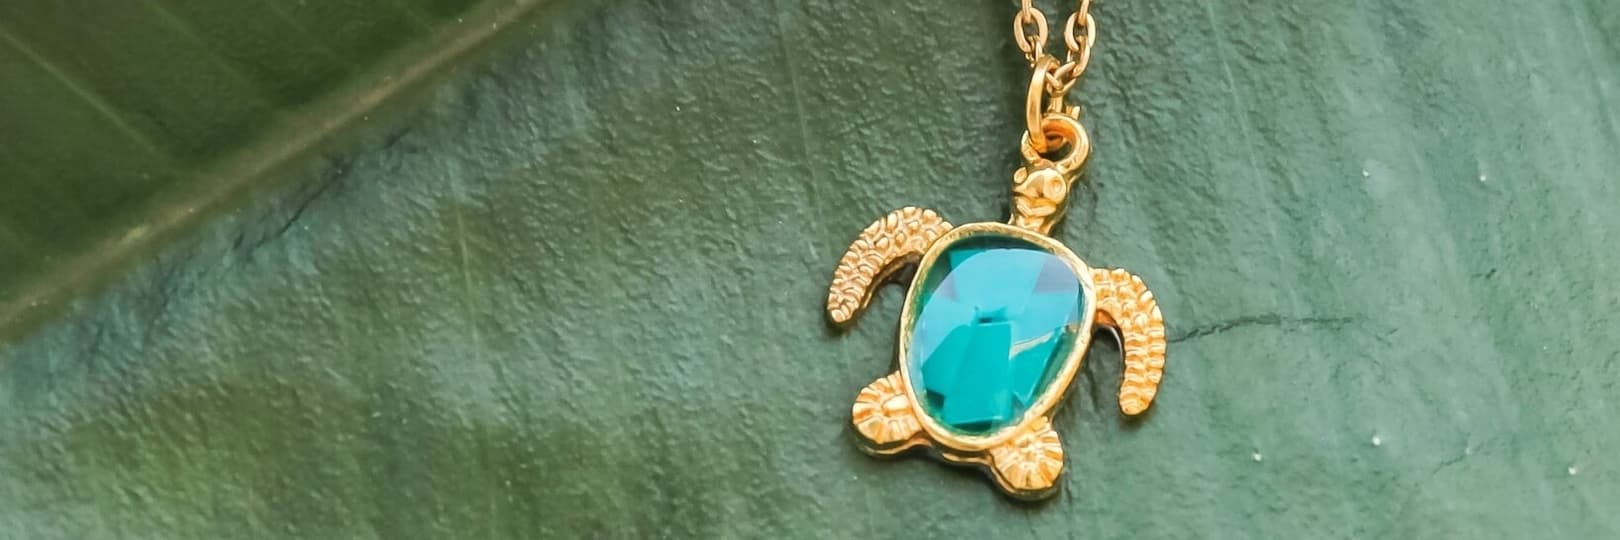 Oceanness eco-friendly gold turtle necklace with ocean plastic